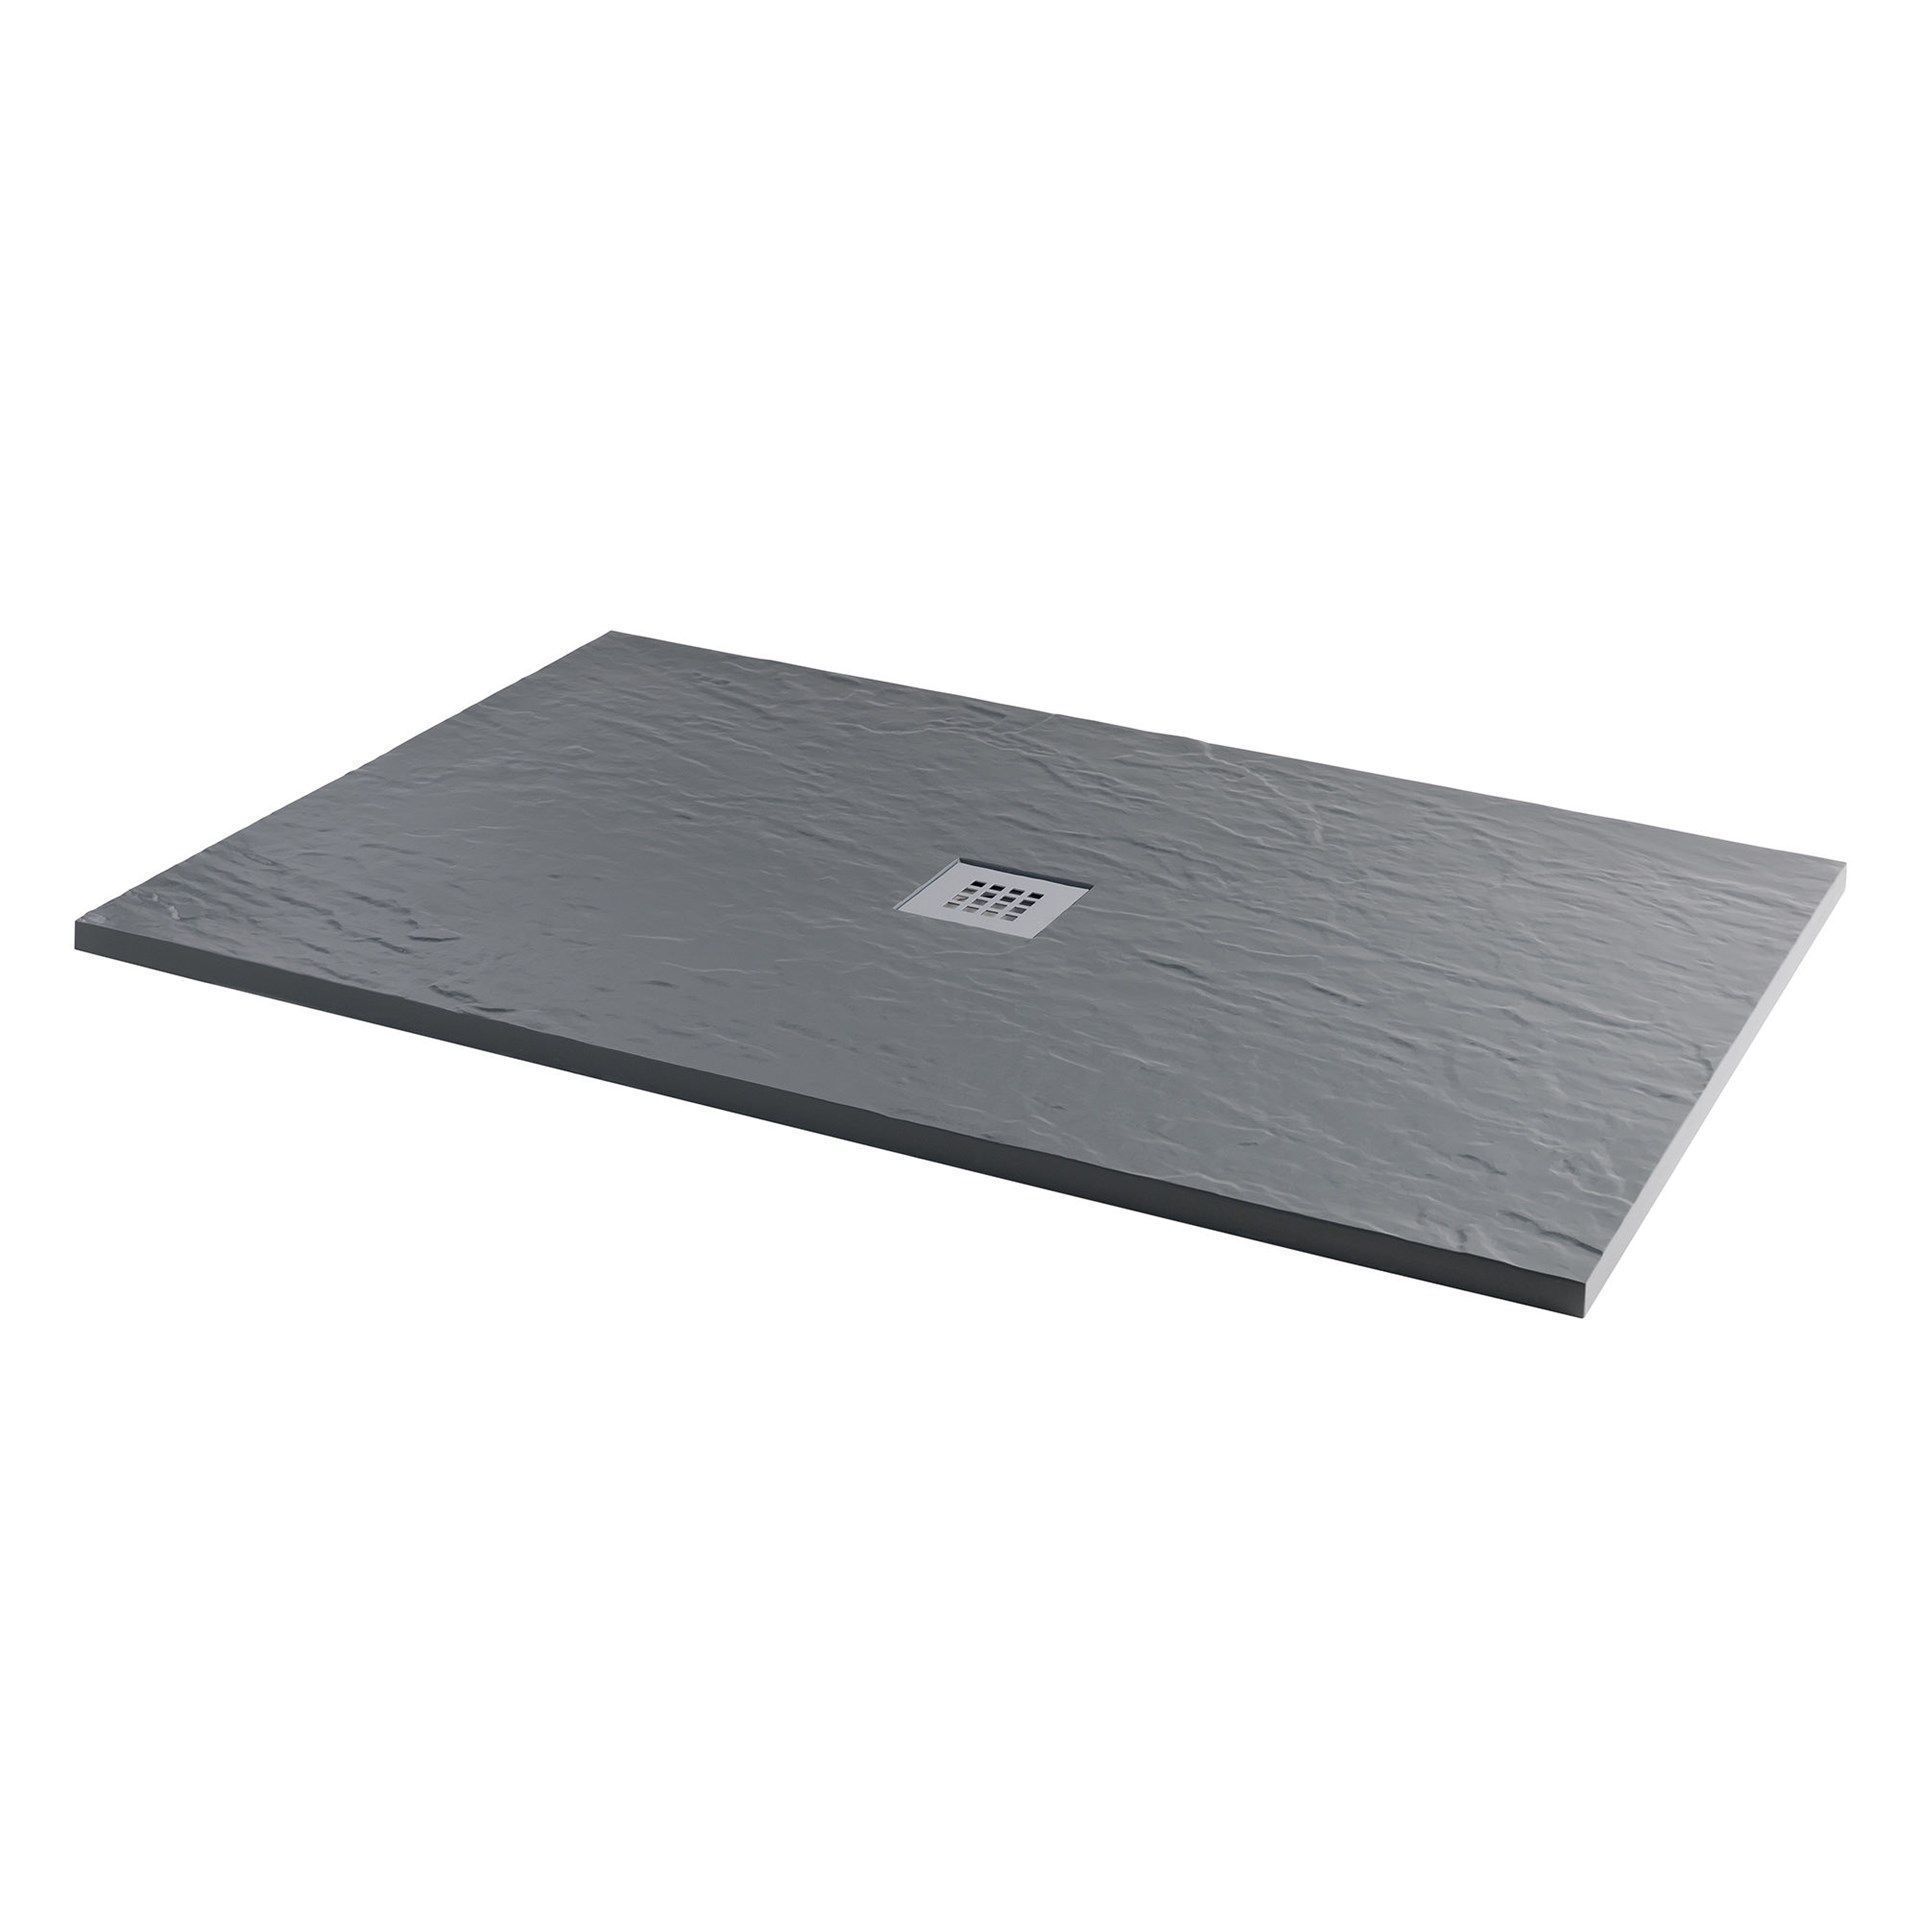 NEW 1200x800mm Rectangular Slate Effect Shower Tray in Grey. Manufactured in the UK from high g... - Image 2 of 2